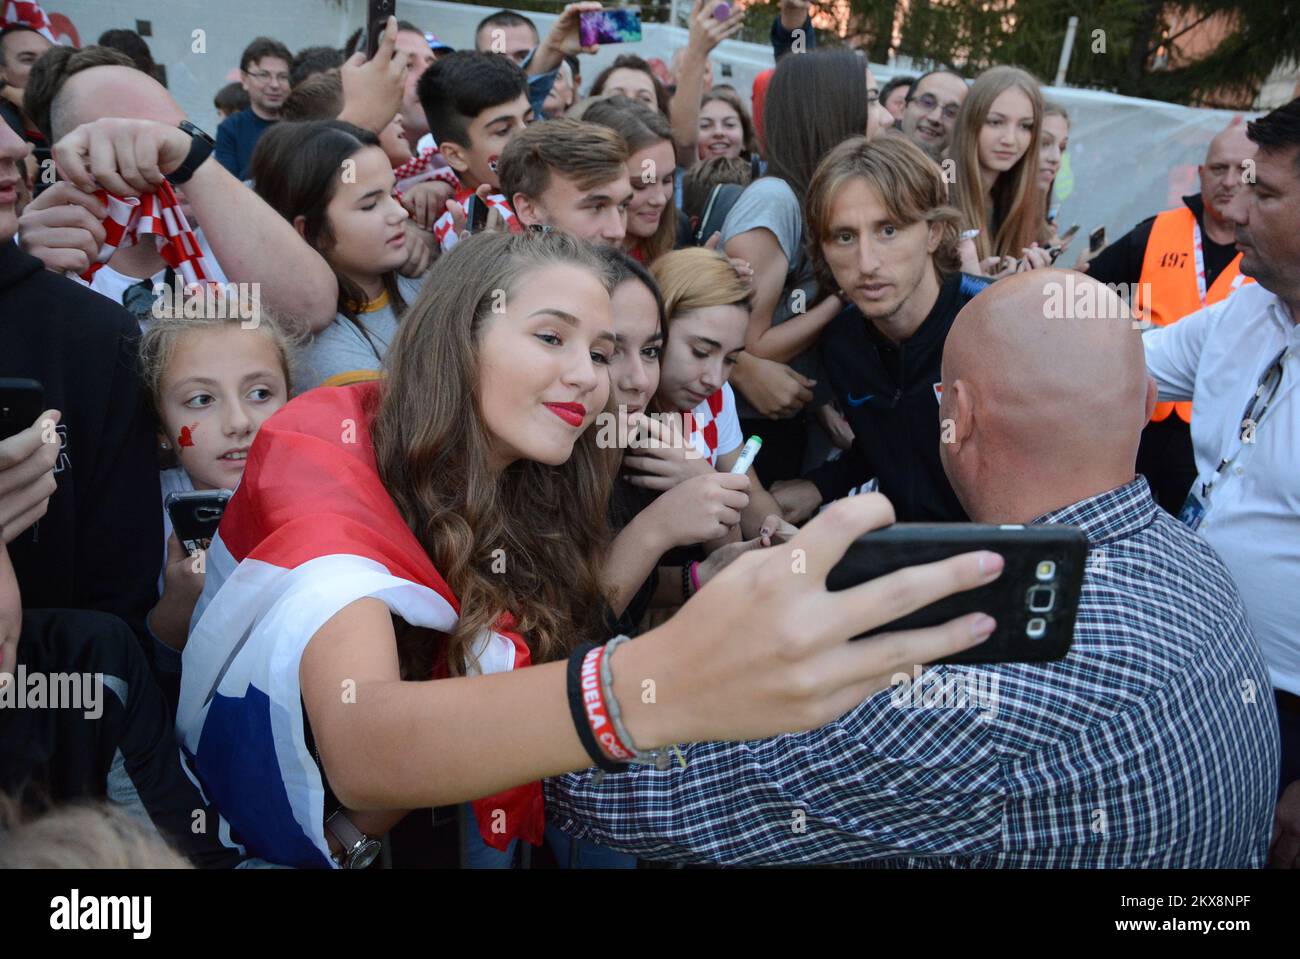 09.10.2018., Croatia, Bjelovar - At the City Stadium was played a festive match between NK Bjelovar and the Croatian national football team on the occasion of the 110th anniversary of the club. Luka Modric. Photo: Marko Prpic/PIXSELL Stock Photo